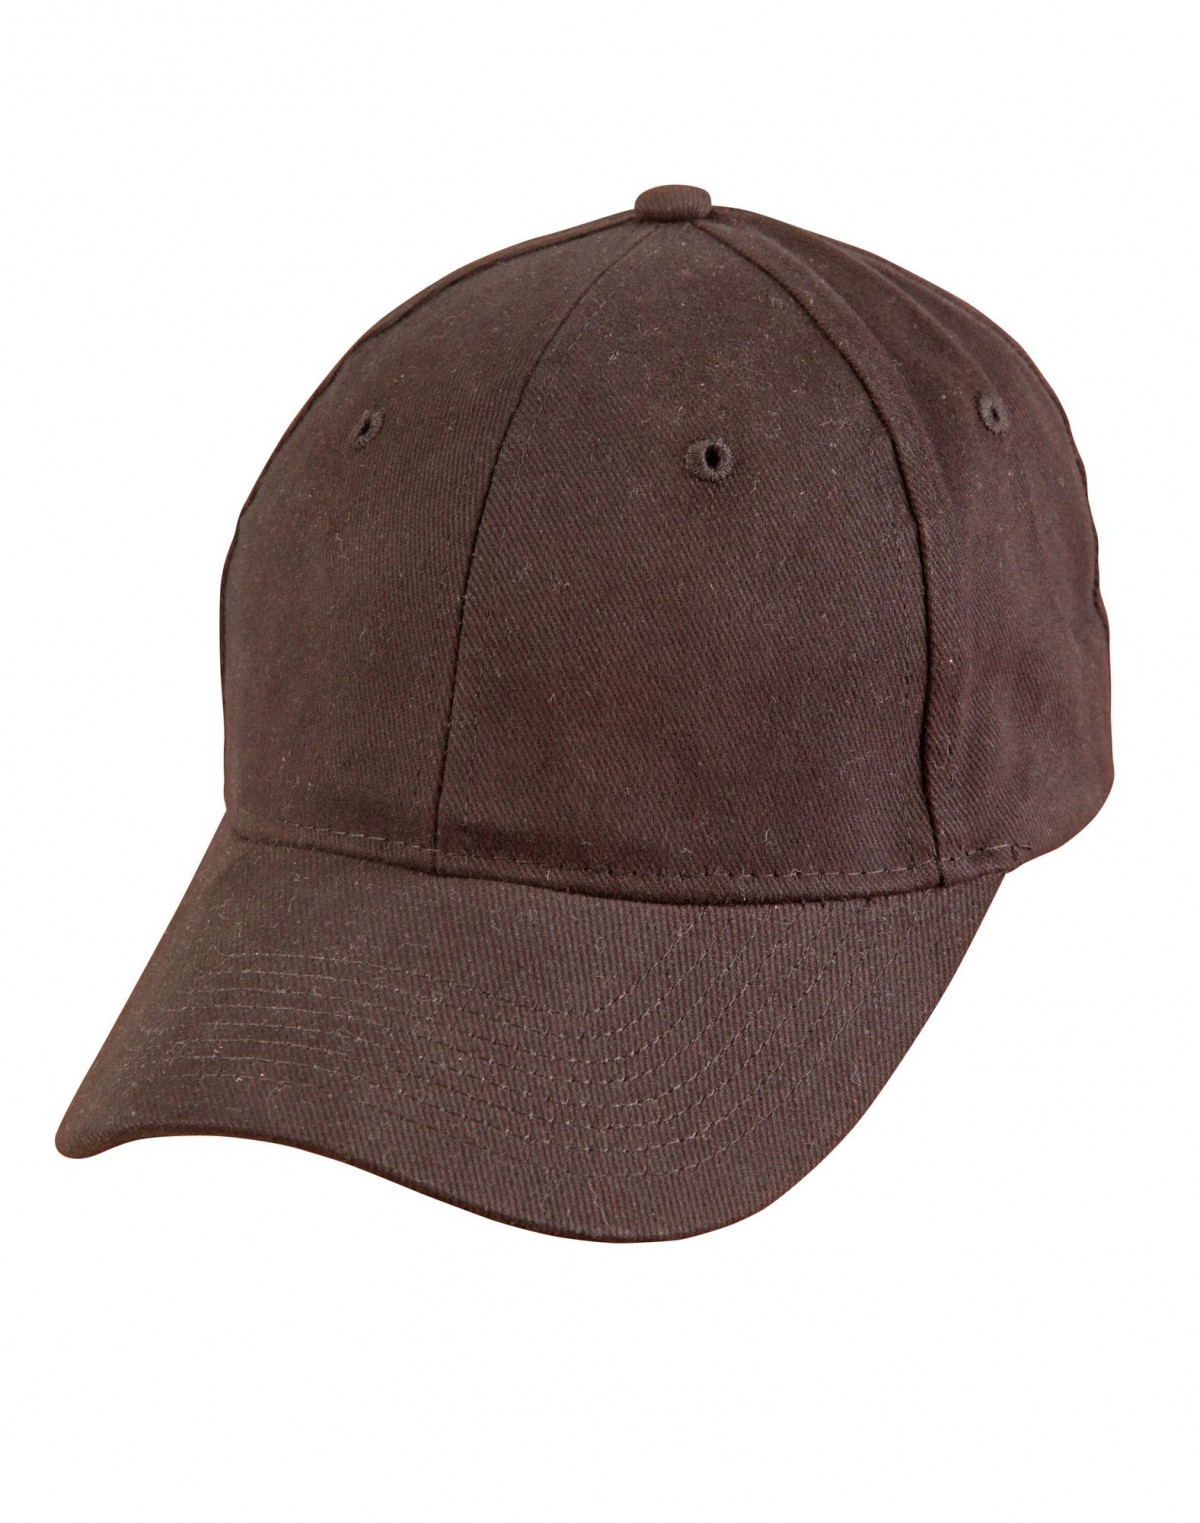 Heavy Brushed Cotton Cap With Buckle - Caps - HEADWEAR - Our Range